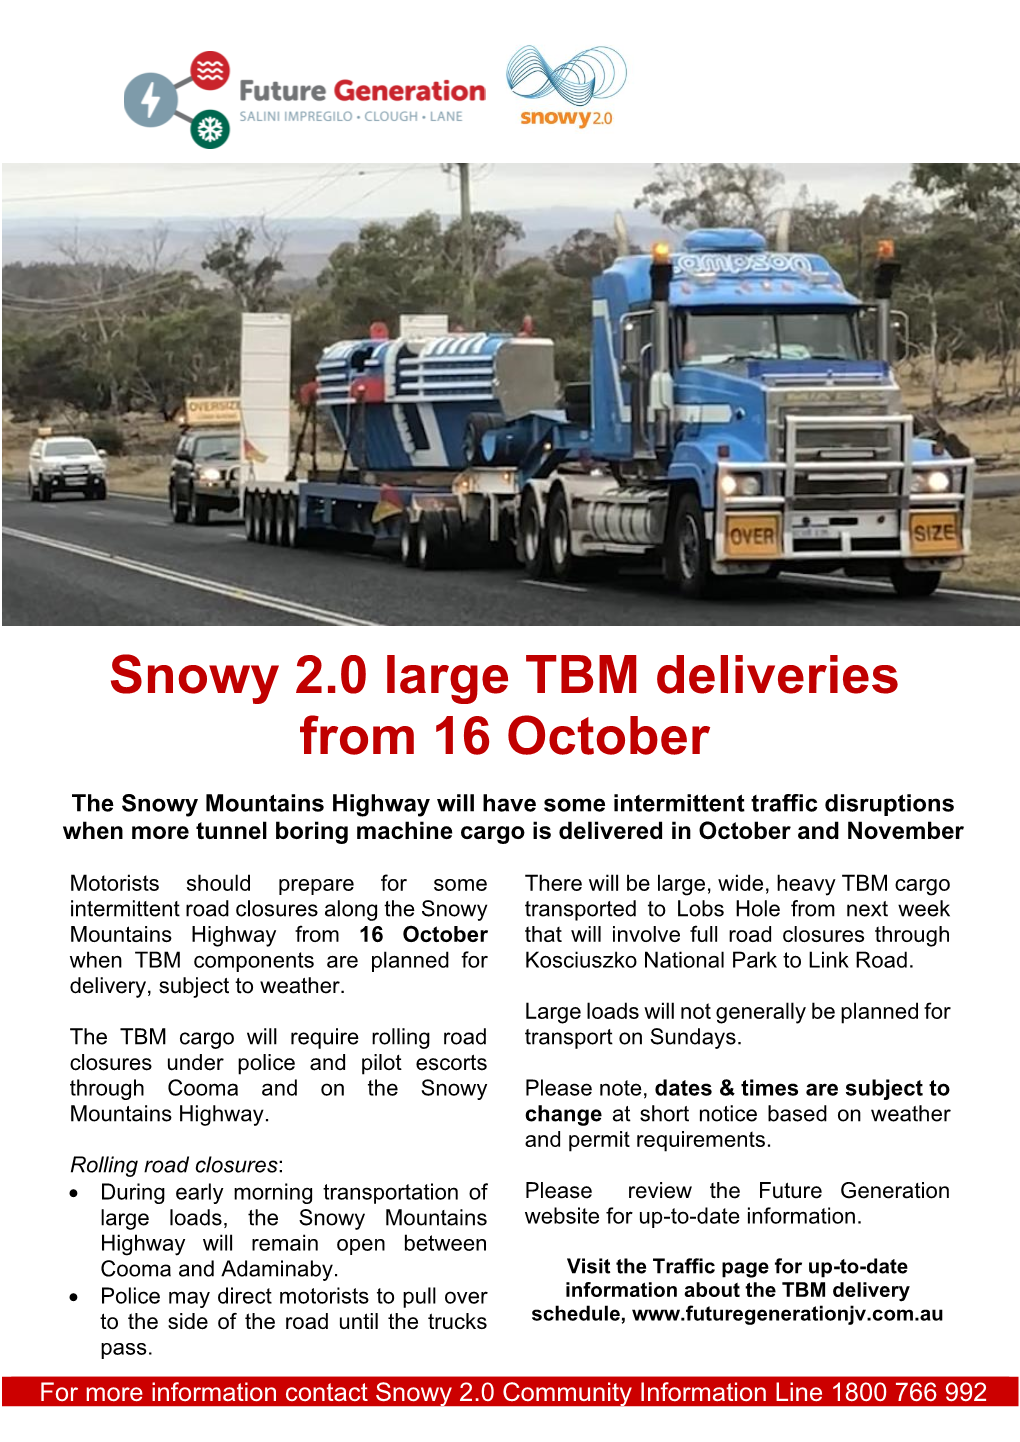 Snowy 2.0 Large TBM Deliveries from 16 October 2020